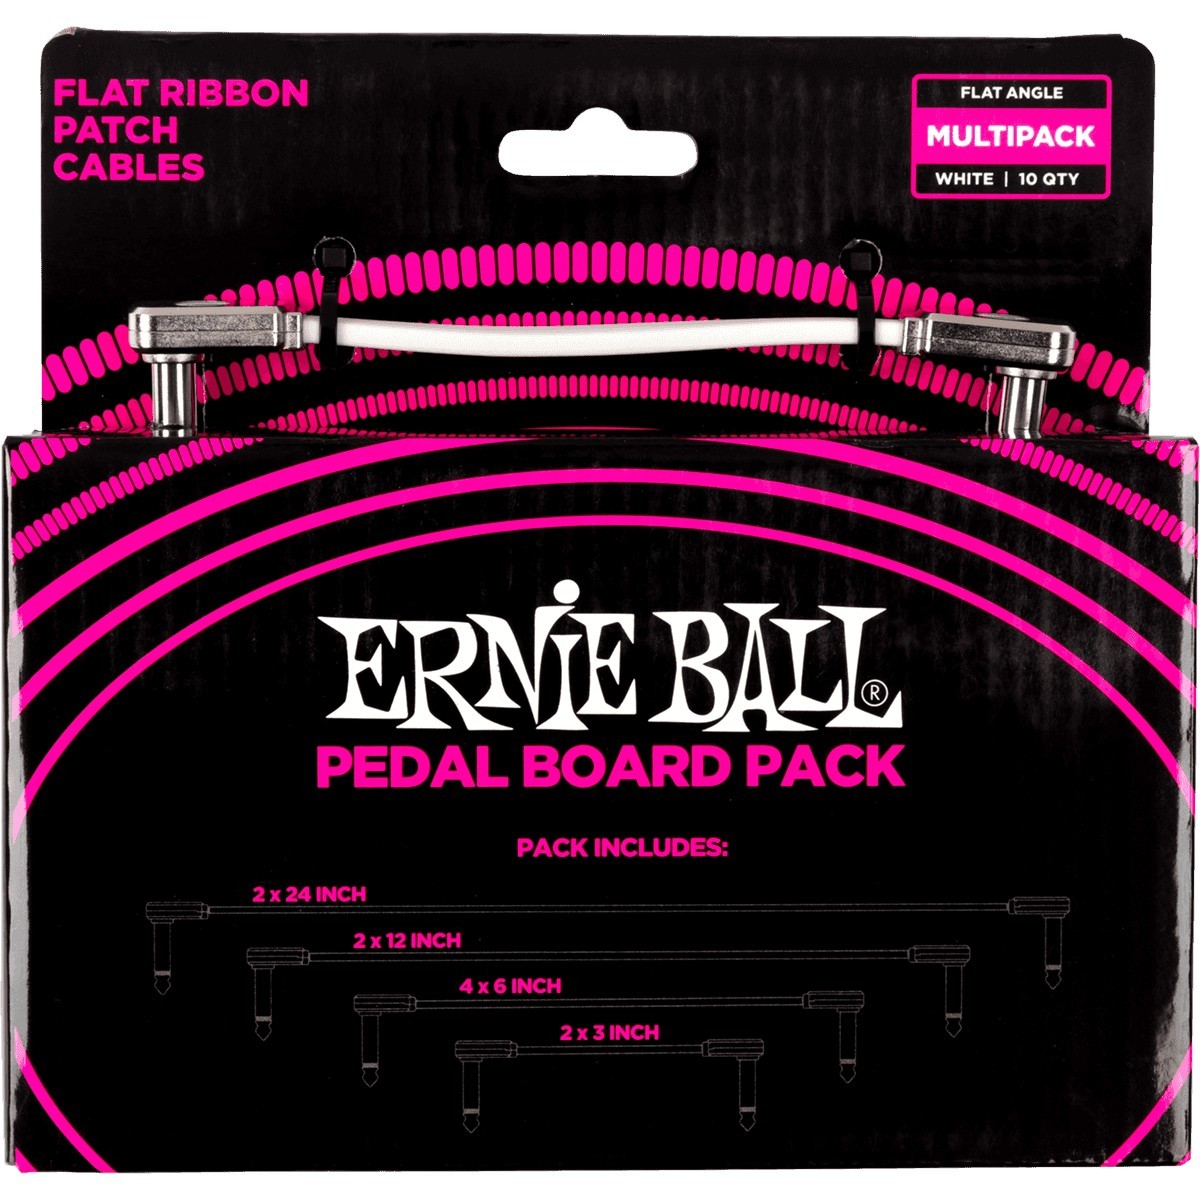 ERNIE BALL Cable Instrument Patch Flat Ribbon Pedal Board Pack